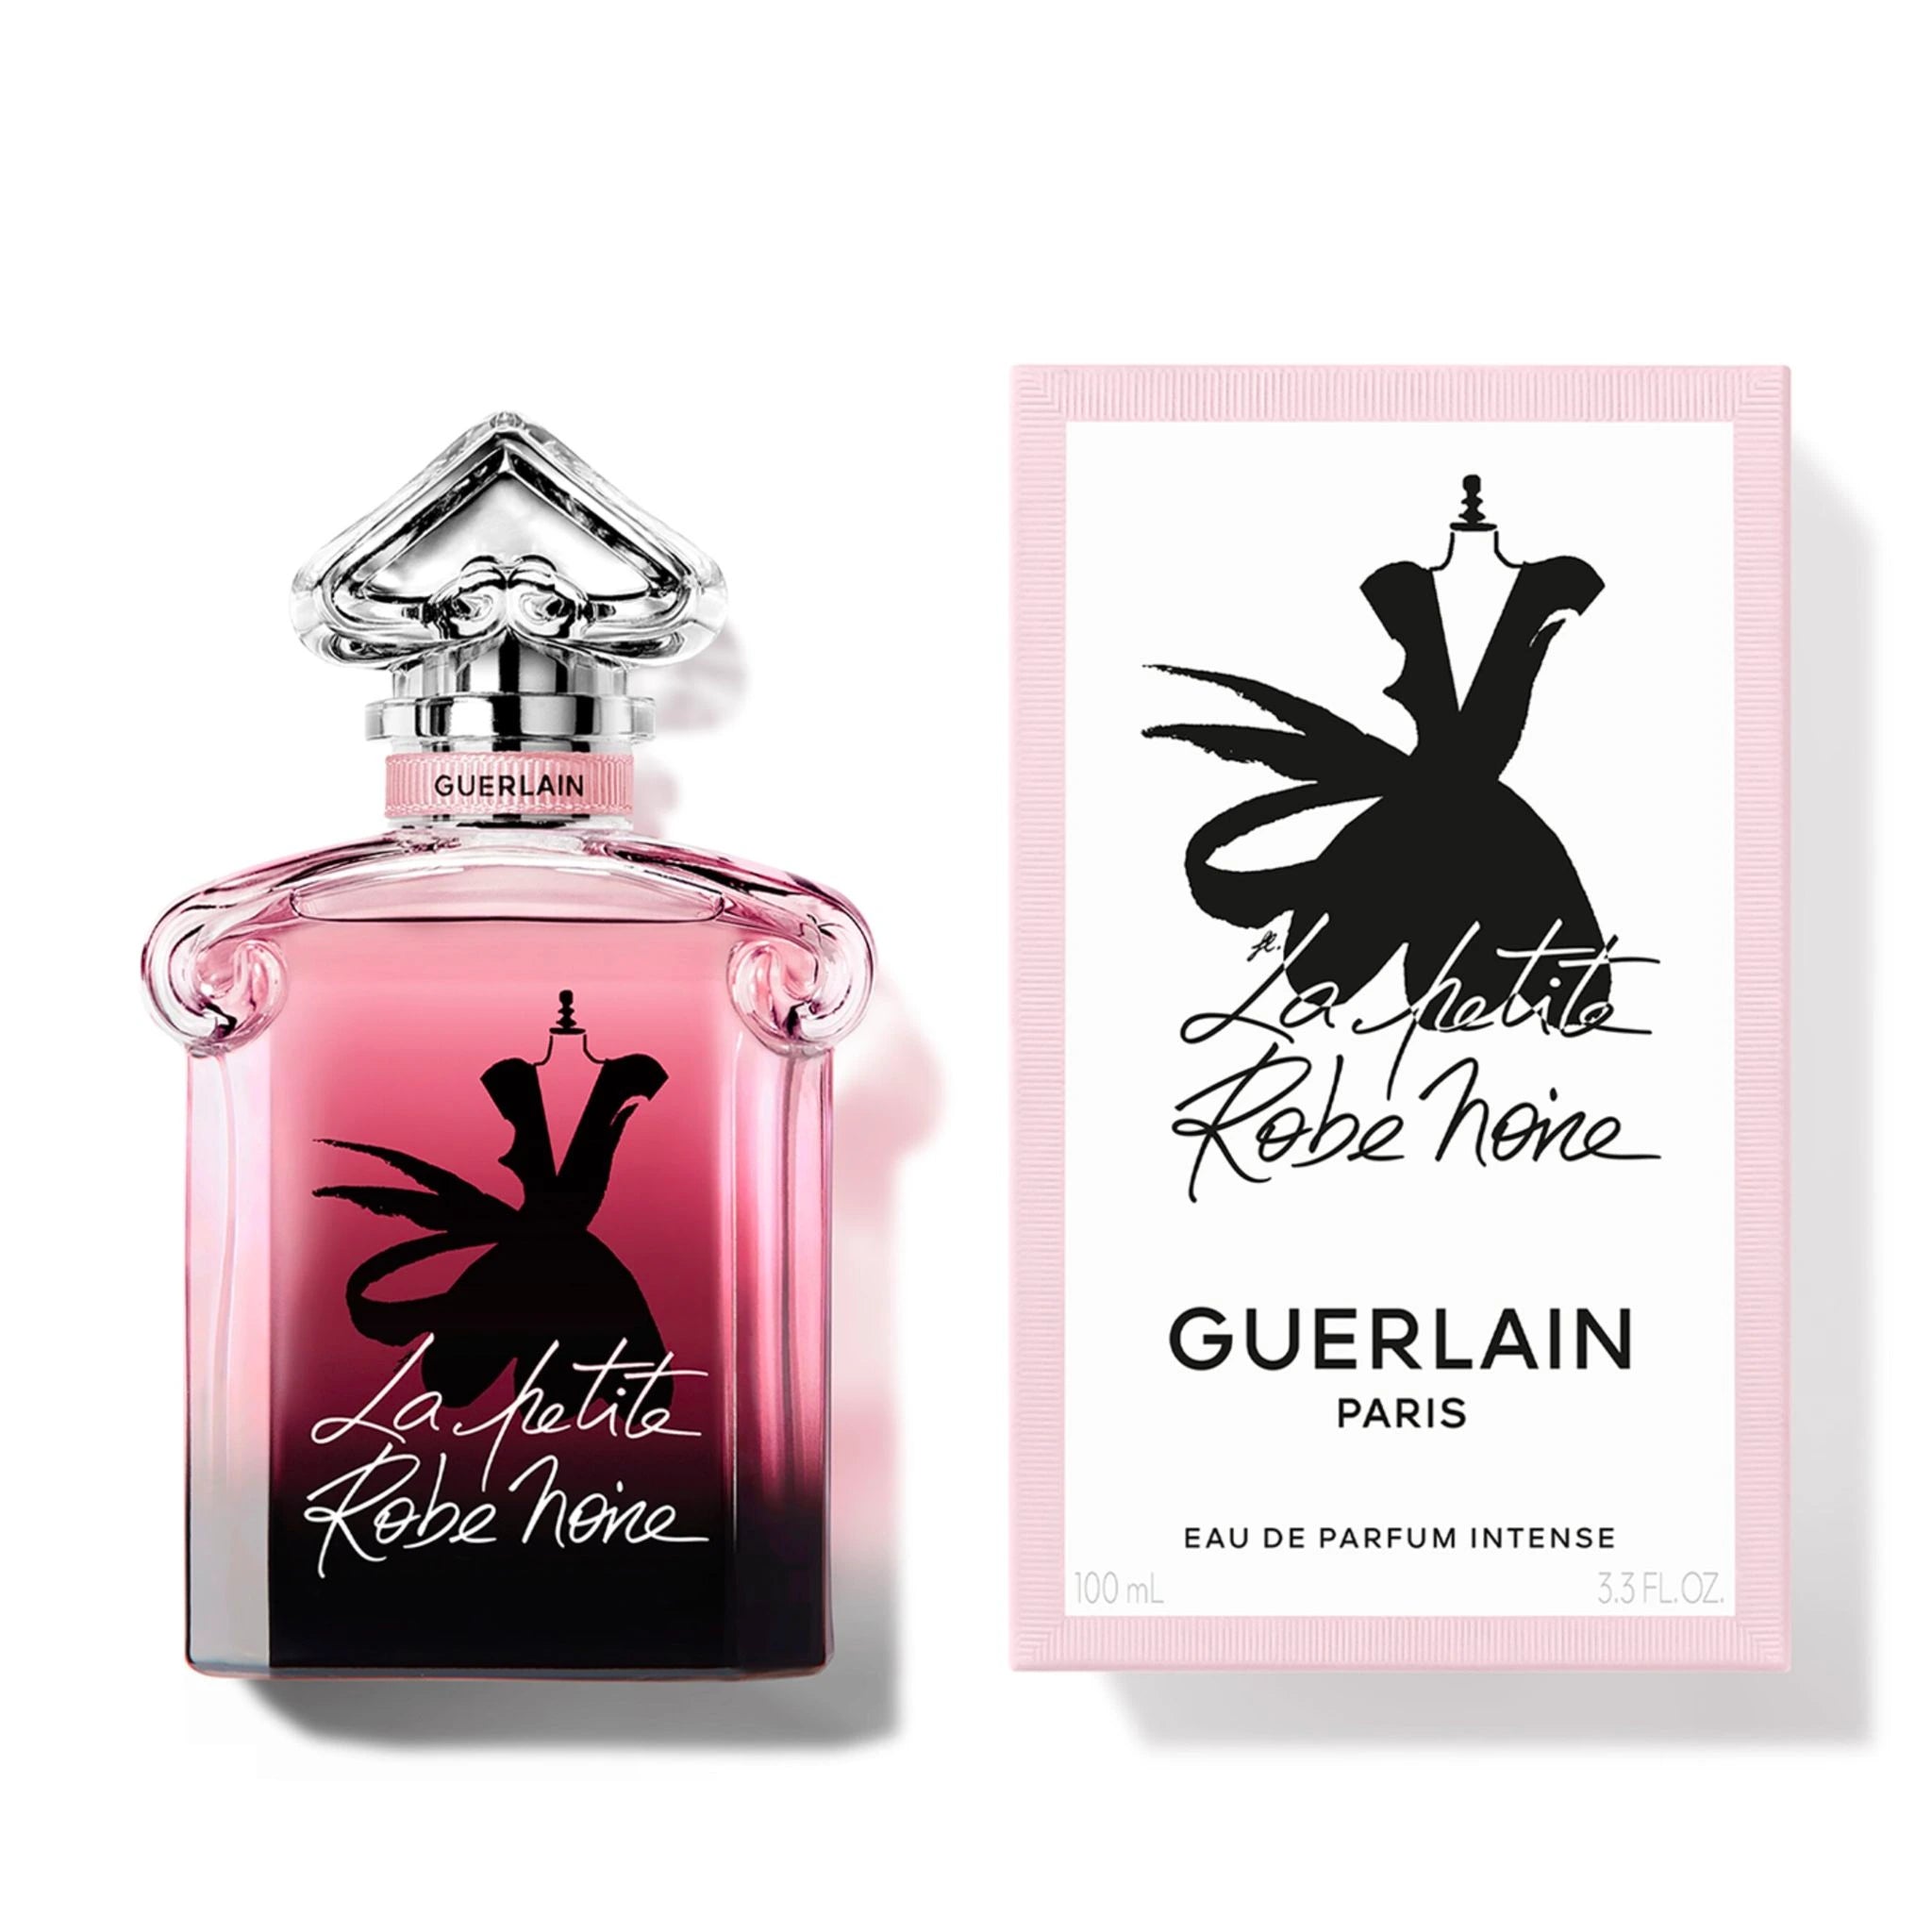 <p><span style="font-family: -apple-system, BlinkMacSystemFont, 'San Francisco', 'Segoe UI', Roboto, 'Helvetica Neue', sans-serif; font-size: 0.875rem;">Transport yourself to the enchanting essence of Parisian style with La Petite Robe Noire Intense Eau de Parfum by Guerlain. An ode to sophistication and romance, this fragrance tantalizes with hints of blueberry, raspberry, and bergamot, while alluring base notes of sandalwood, patchouli, and white musk linger on the skin. Delicate rose, jasmine, and orange flower middle notes add a touch of elegance, while top notes of bergamot, blueberry, and strawberry entice with their sweet yet refined aroma. Experience the allure and luxury of this exquisite fragrance, and watch as your admirers fall at your feet.</span><br></p>